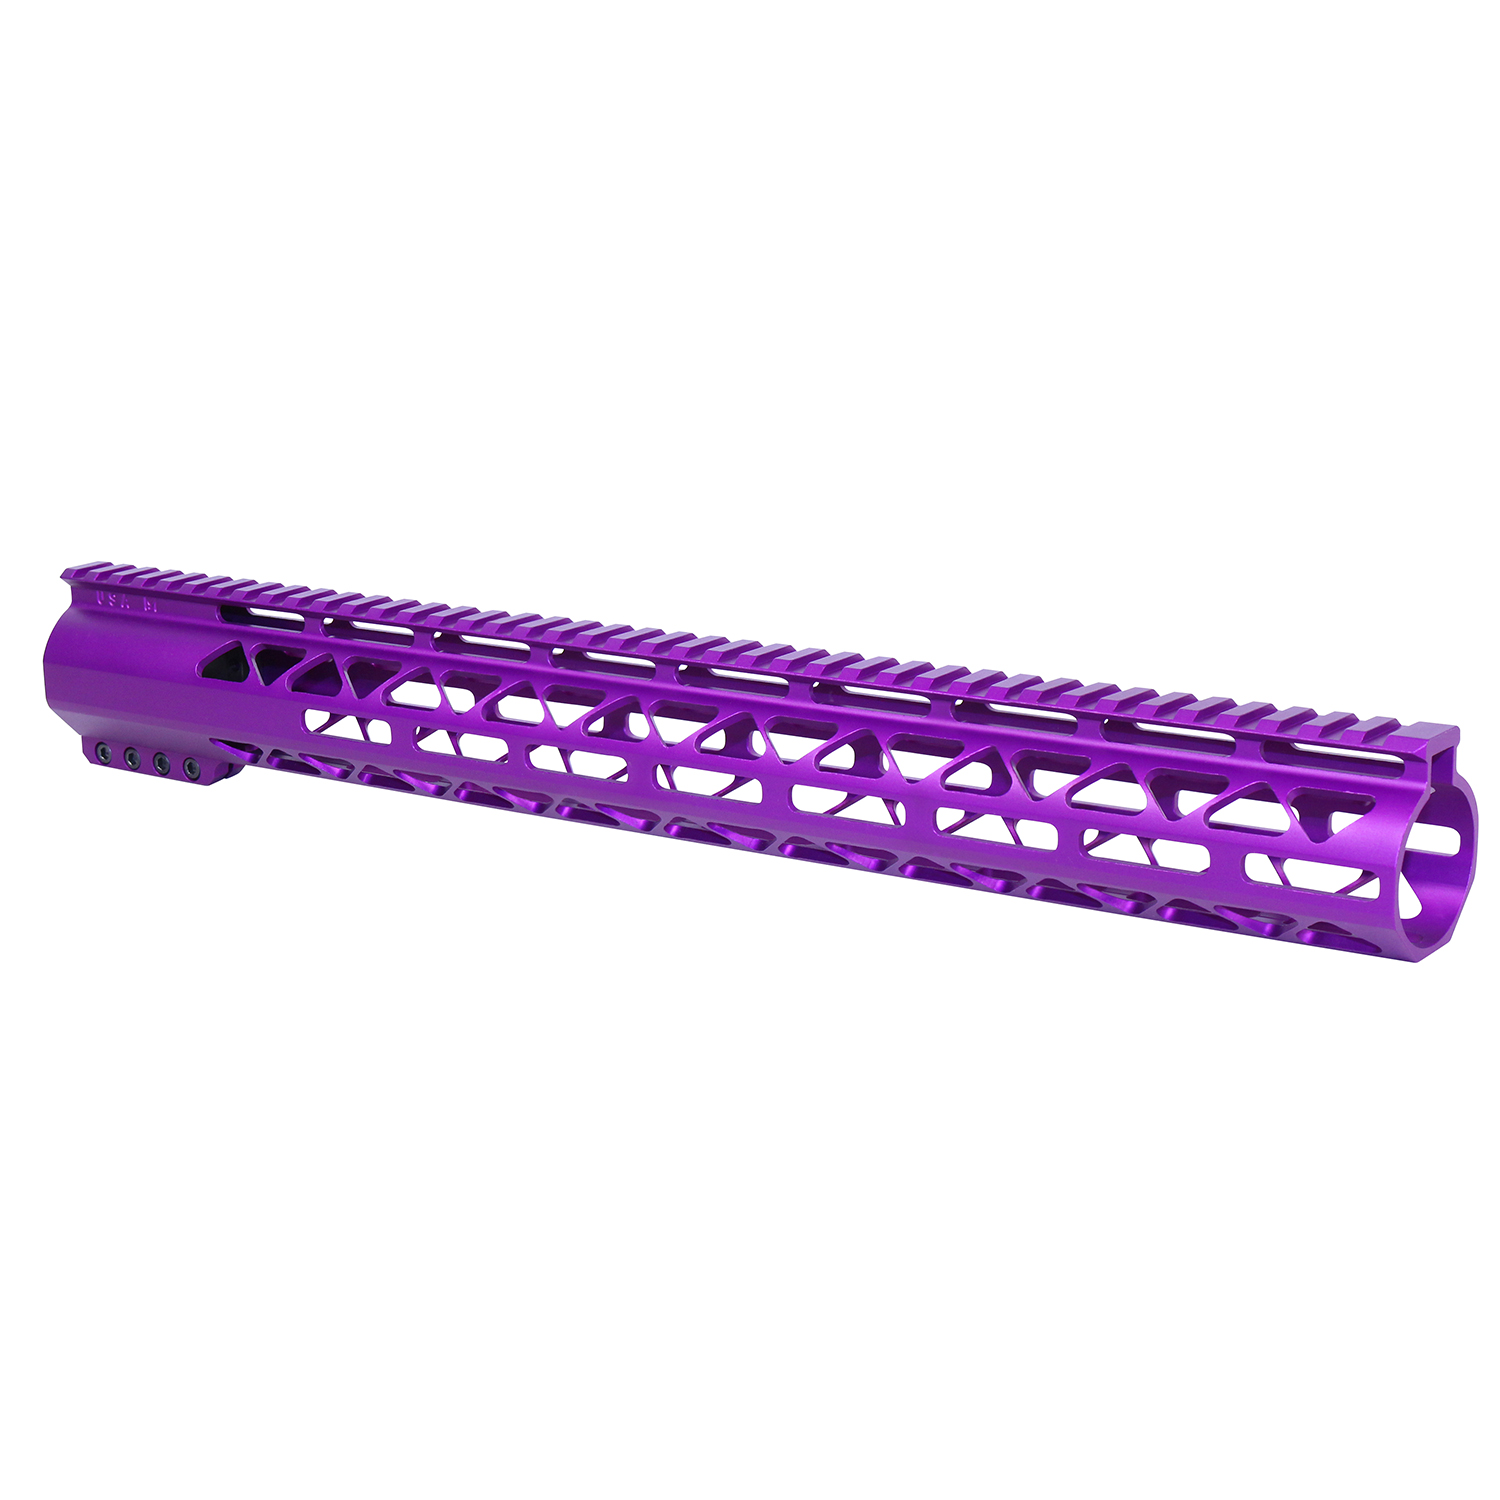 16.5" AIR-LOK Series M-LOK Compression Free Floating Handguard With Monolithic Top Rail (.308 Cal) (Anodized Purple)